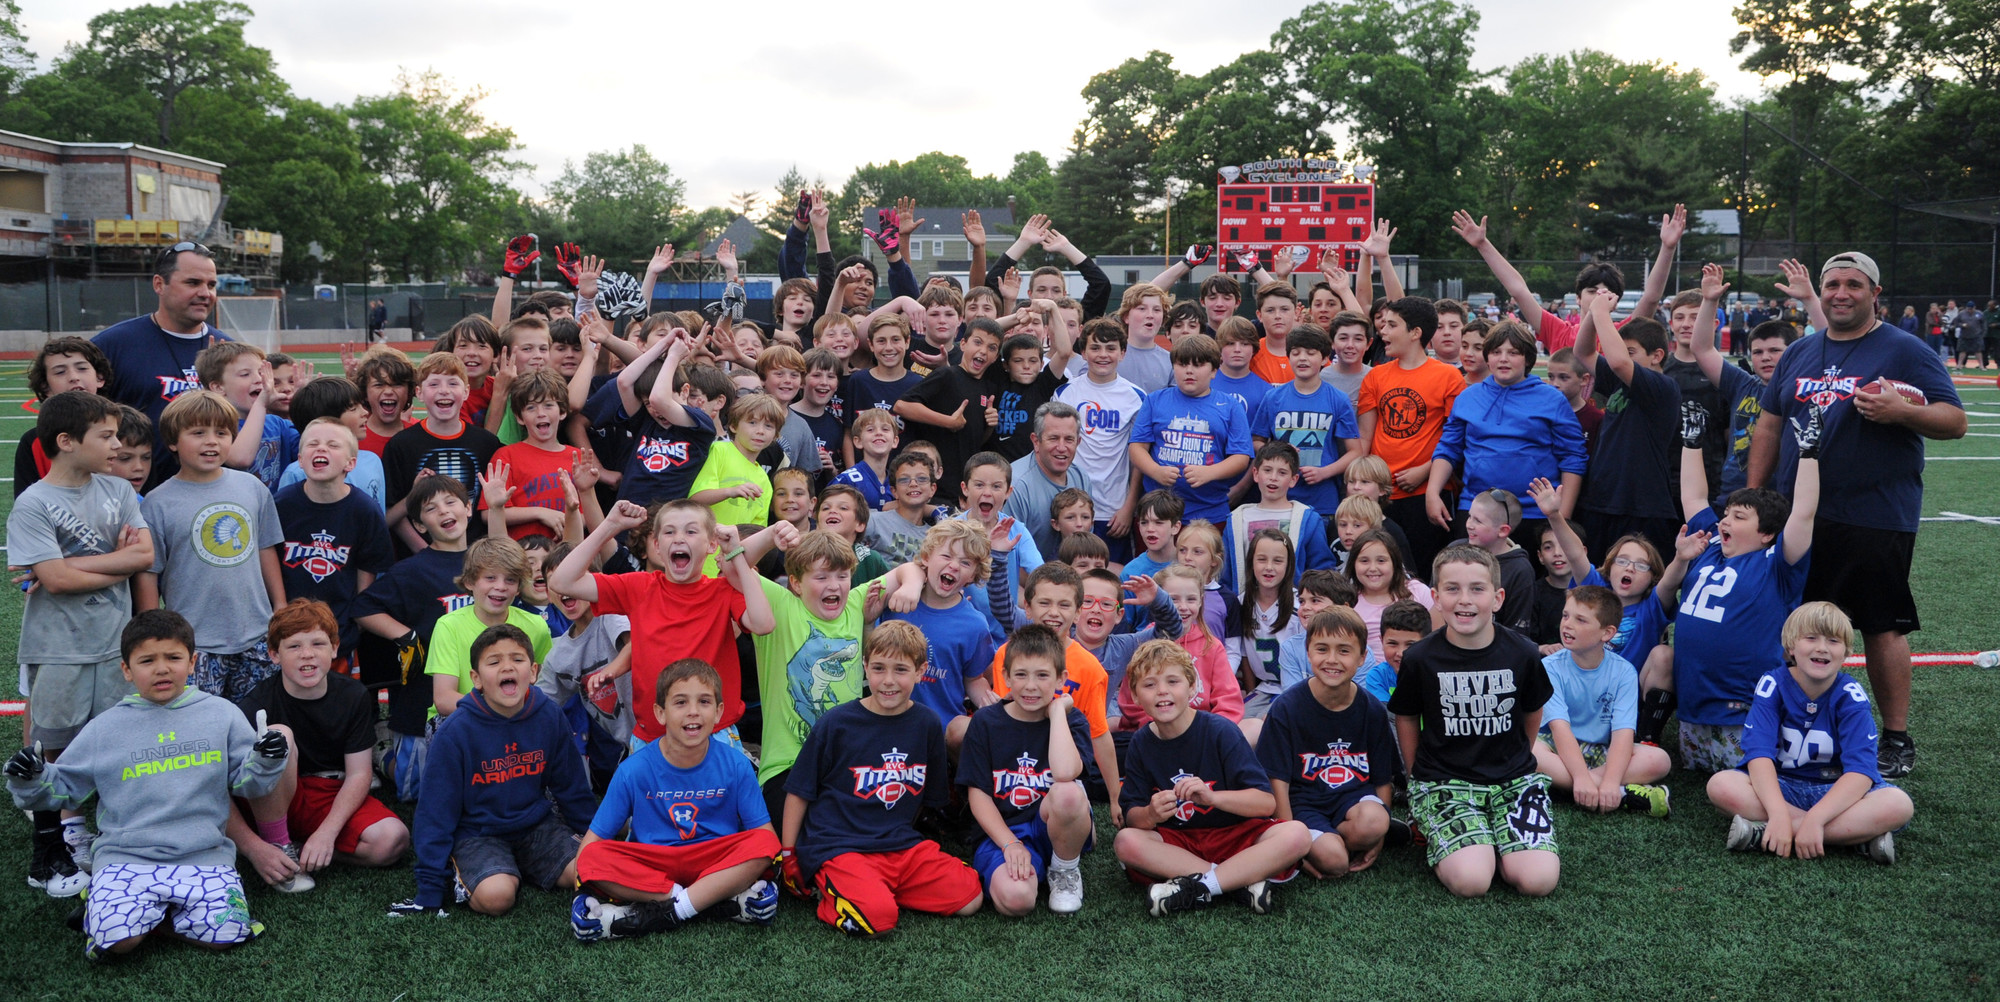 More than 100 youngsters attended last week’s football clinic hosted by South Side High School varsity coach Phil Onesto.